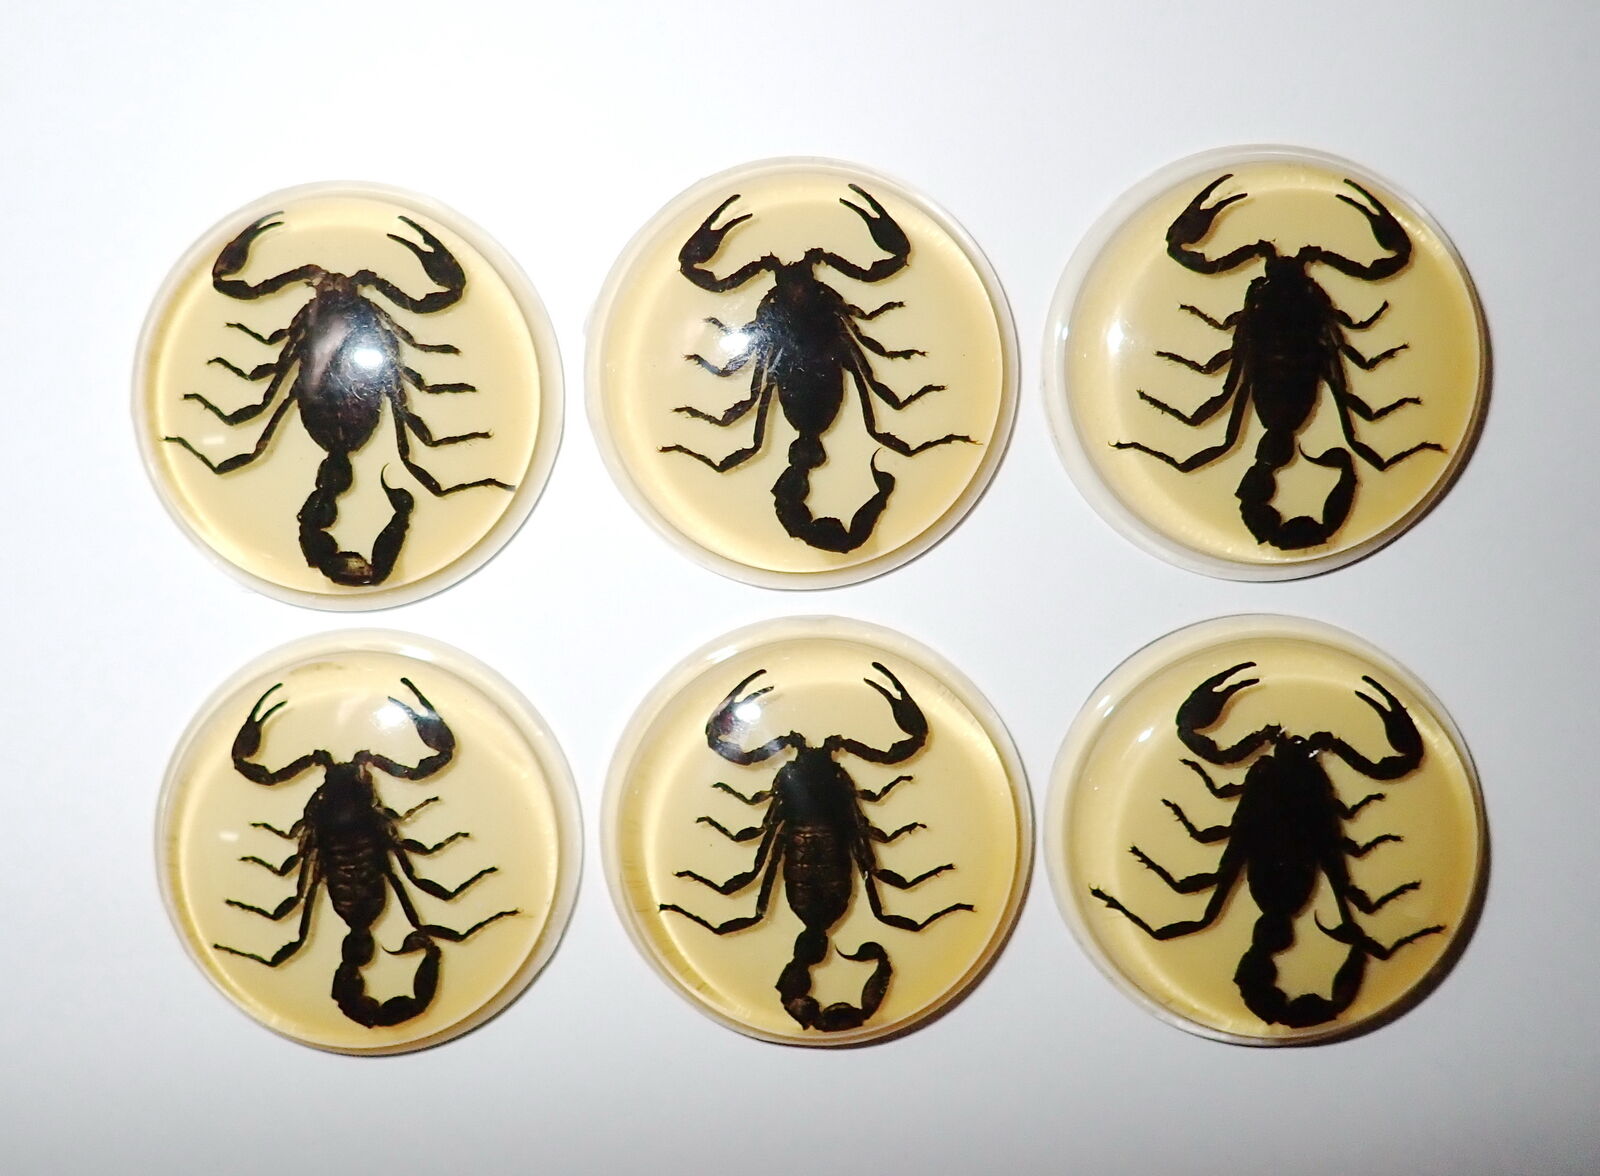 Insect Cabochon Black Scorpion 38.5 mm Round inner 35 mm Amber White 10 pcs Lot